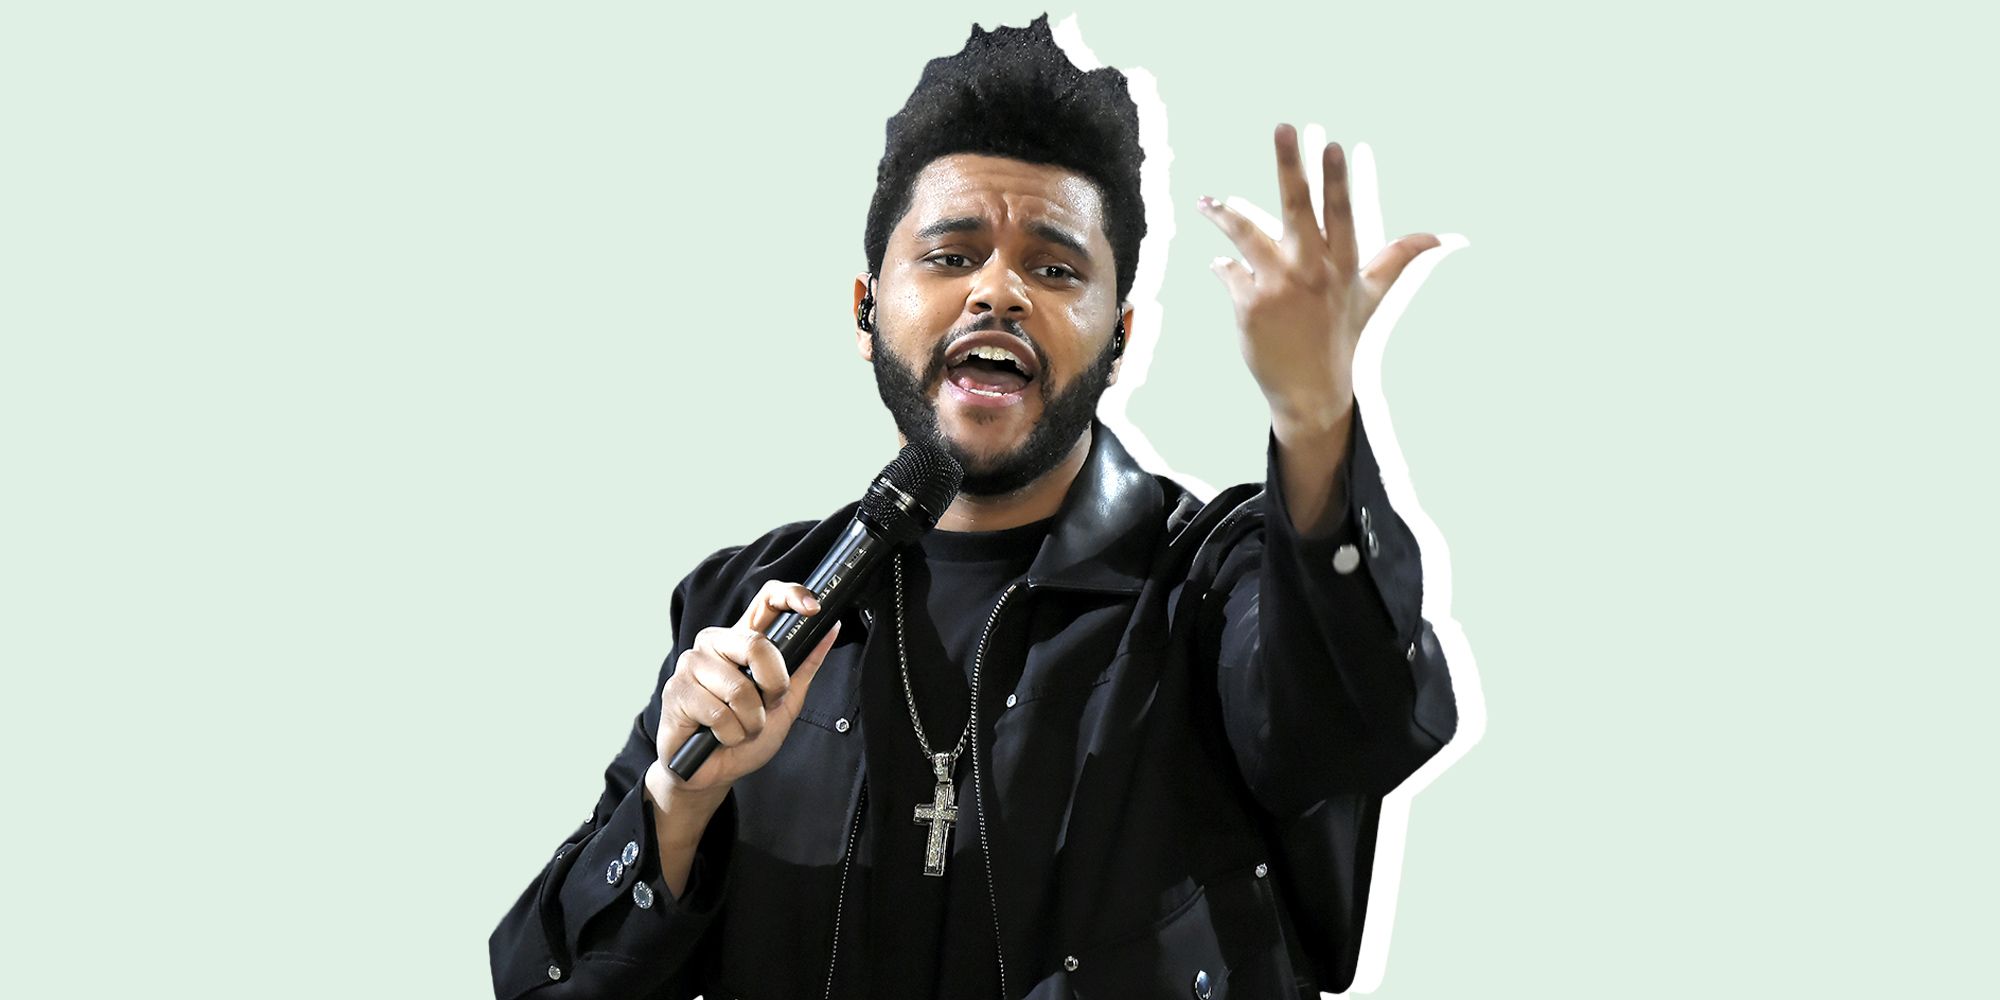 The Weeknd on Writing About Sex and Calling Women Bitches in His Songs